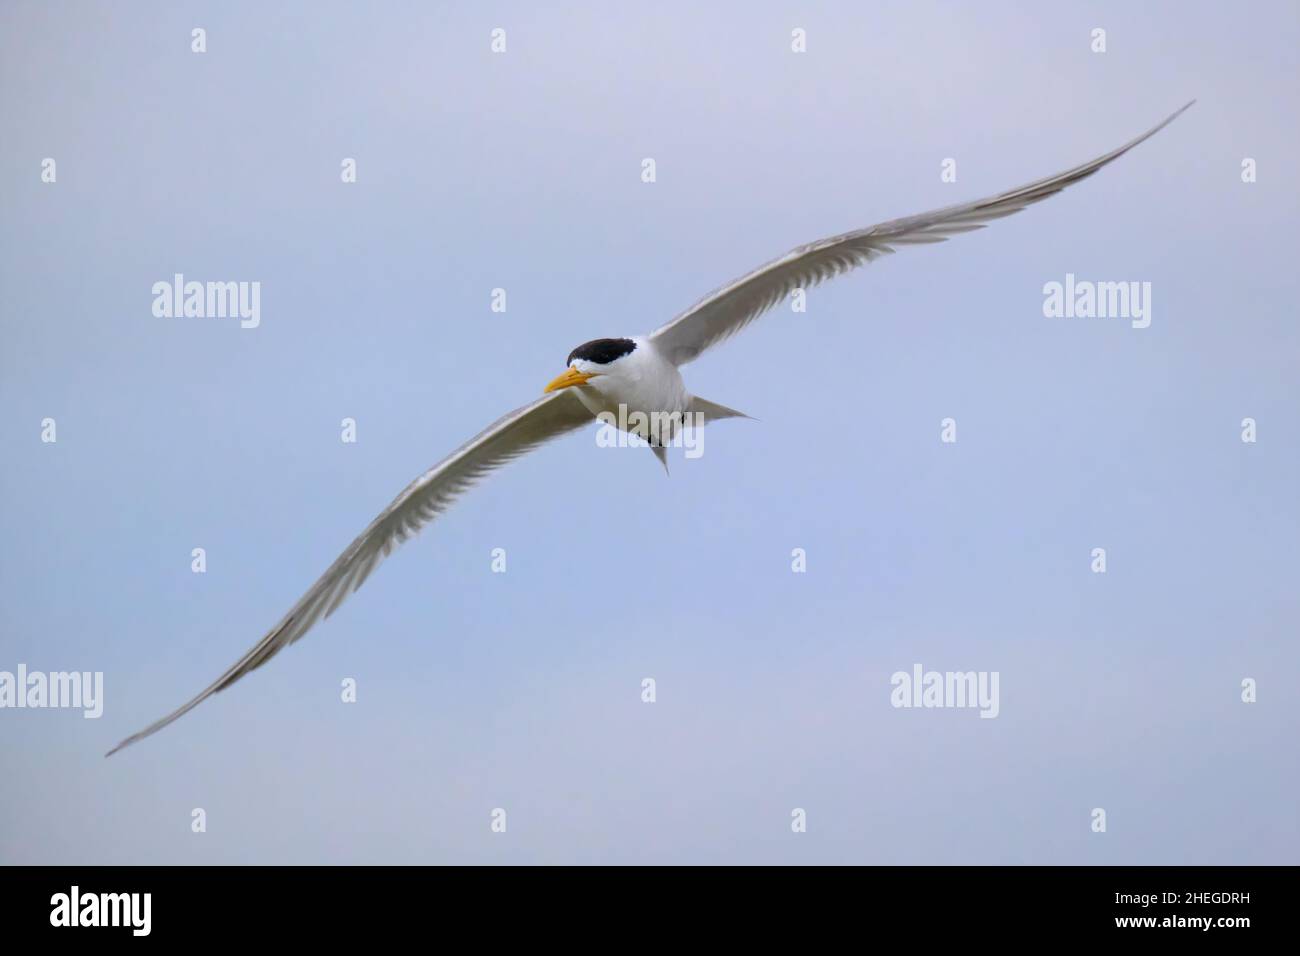 Crested Tern In Flight Stock Photo